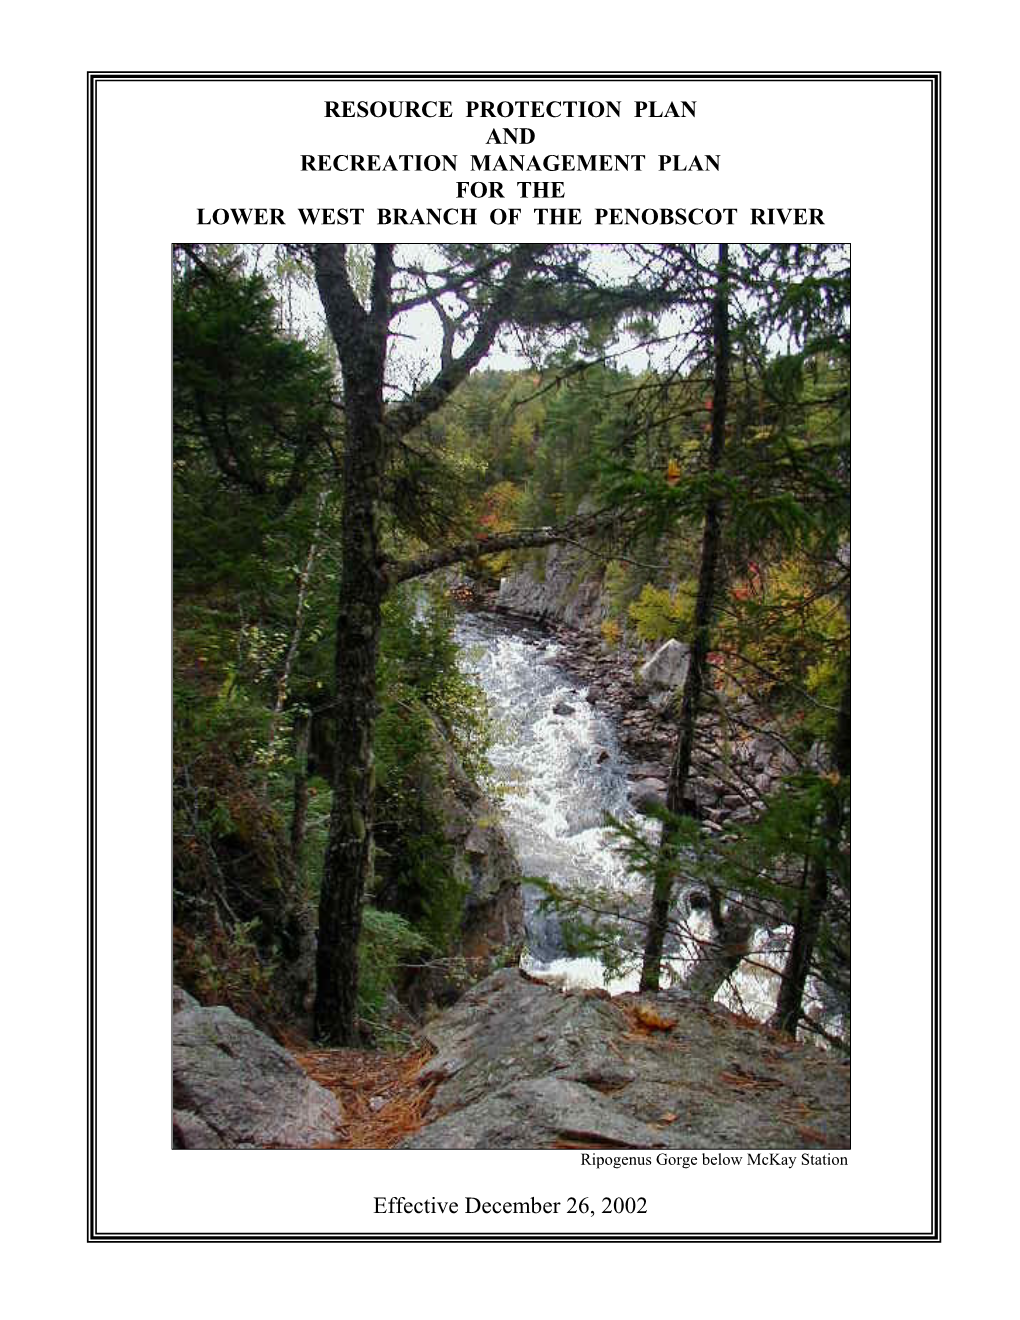 Resource Protection Plan and Recreation Management Plan for the Lower West Branch of the Penobscot River